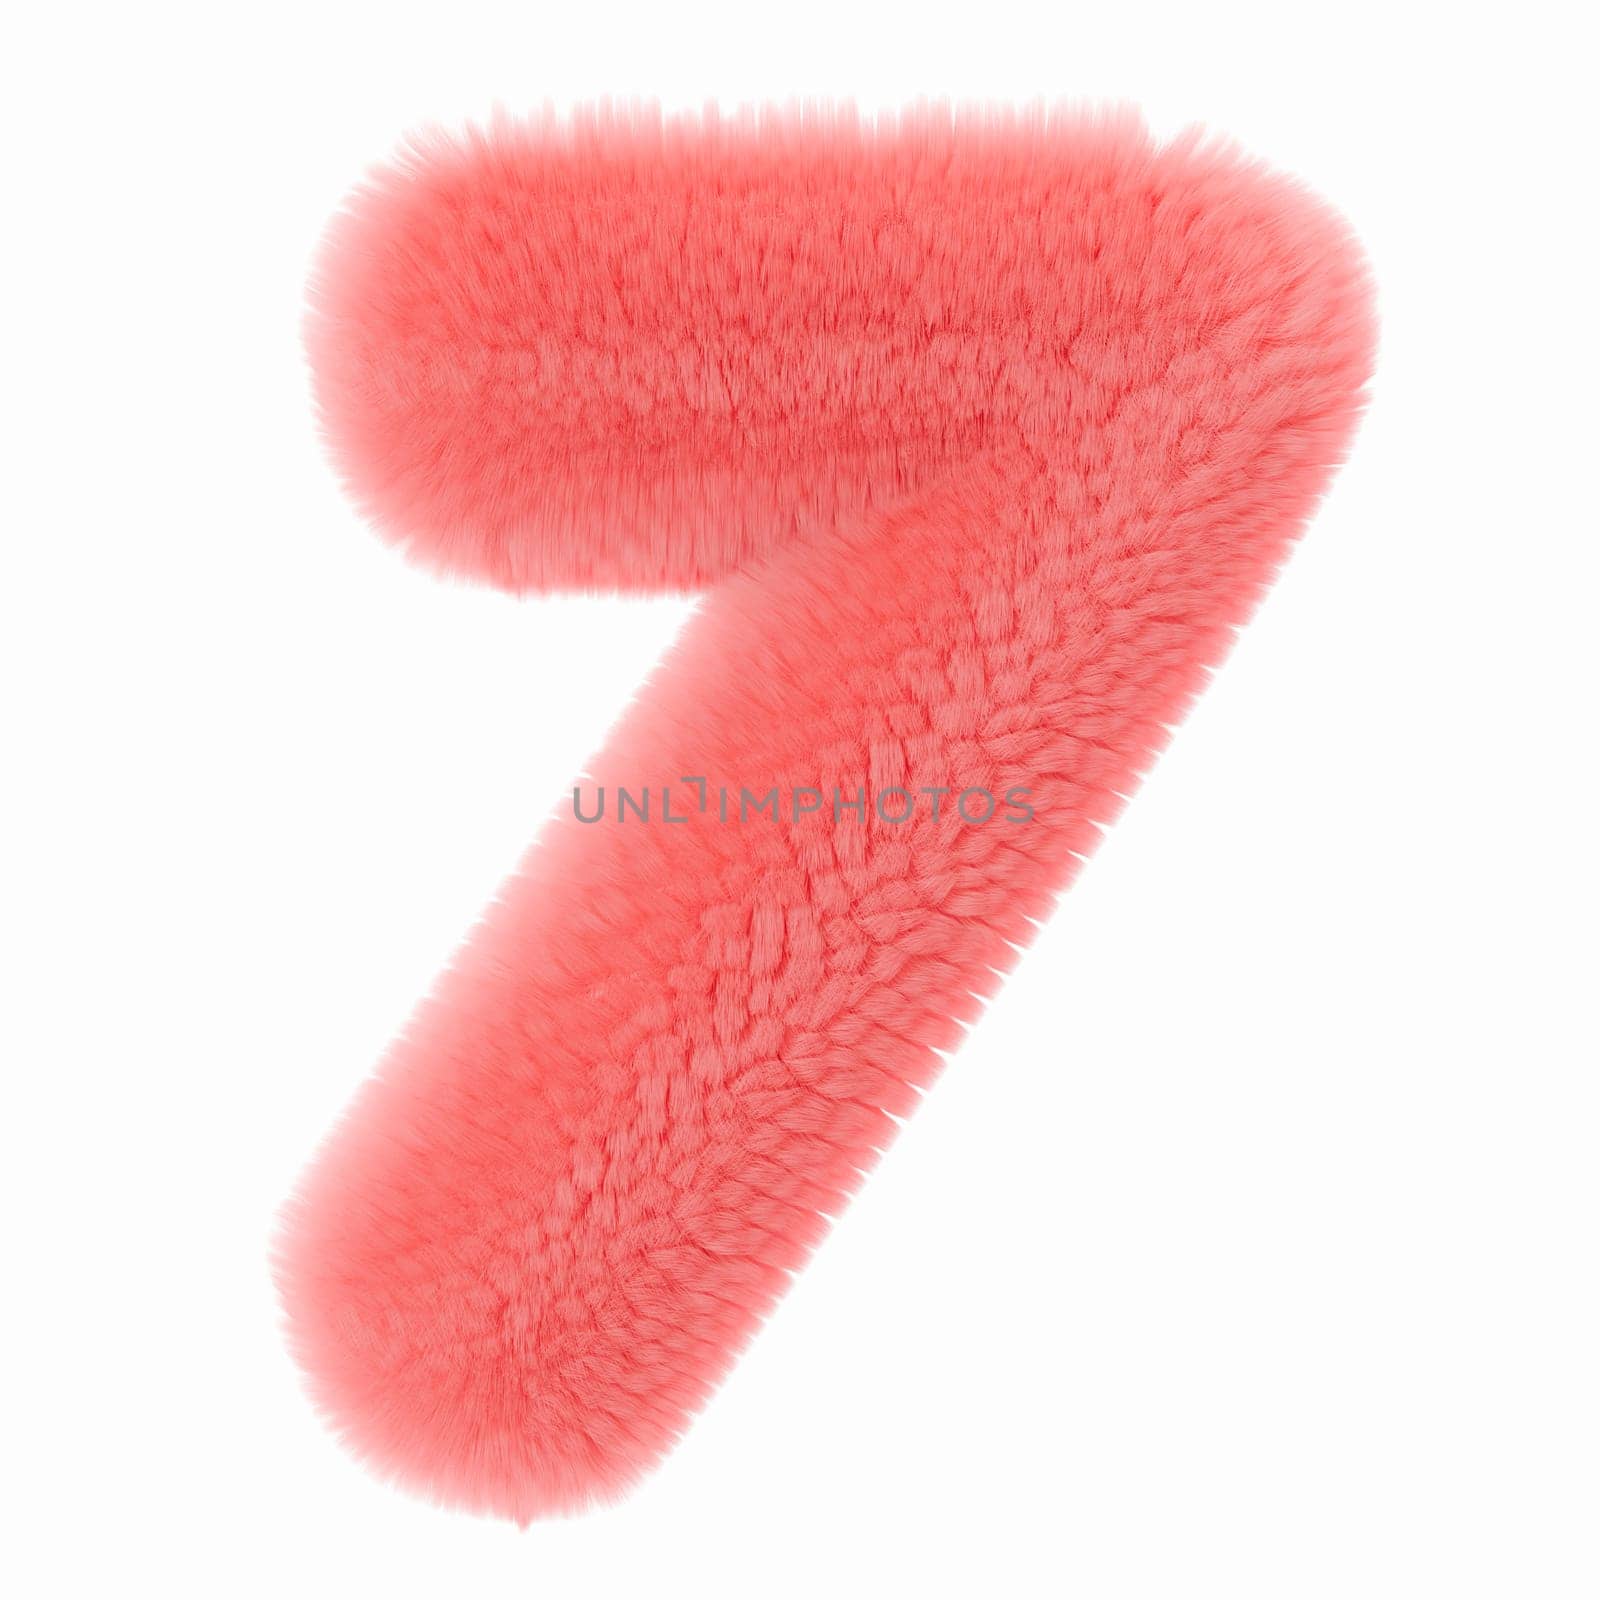 Pink and fluffy 3D number seven, isolated on white background. Furry, soft and hairy symbol 7. Trendy, cute design element. Cut out object. 3D rendering. by creativebird